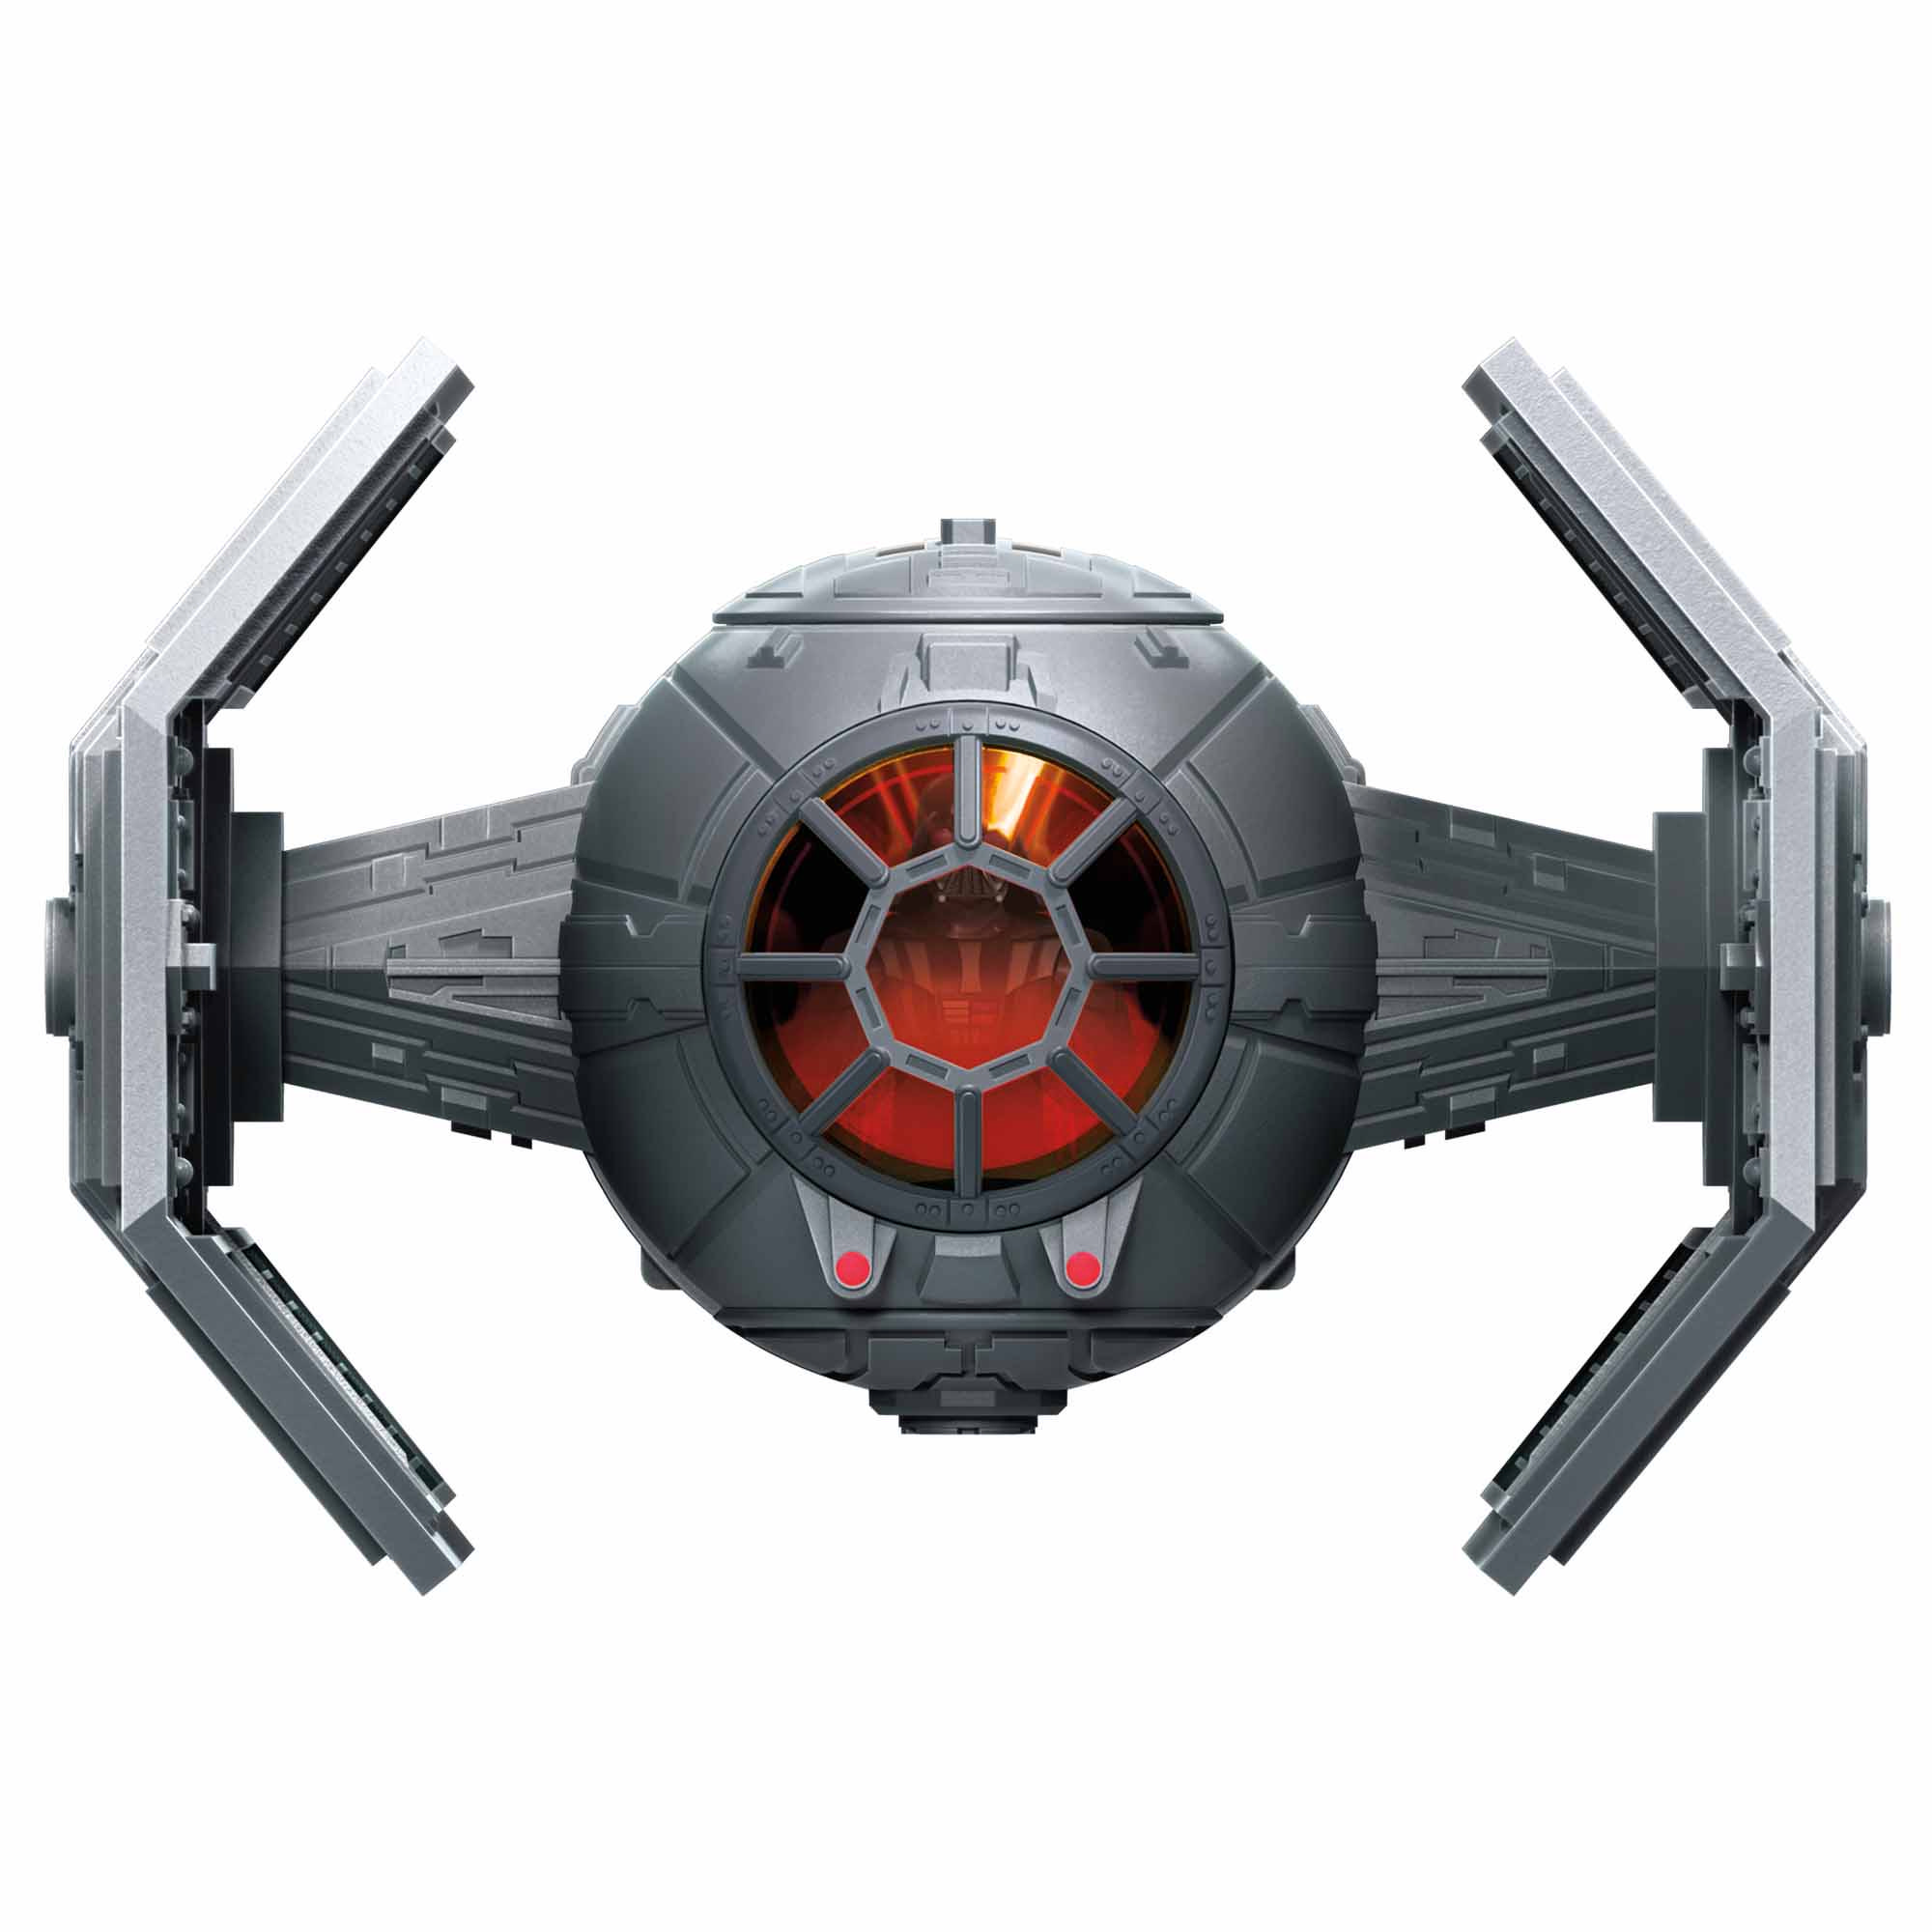 Star Wars Mission Fleet Stellar Class Darth Vader TIE Advanced 2.5-Inch-Scale Figure and Vehicle, for Kids Ages 4 and Up